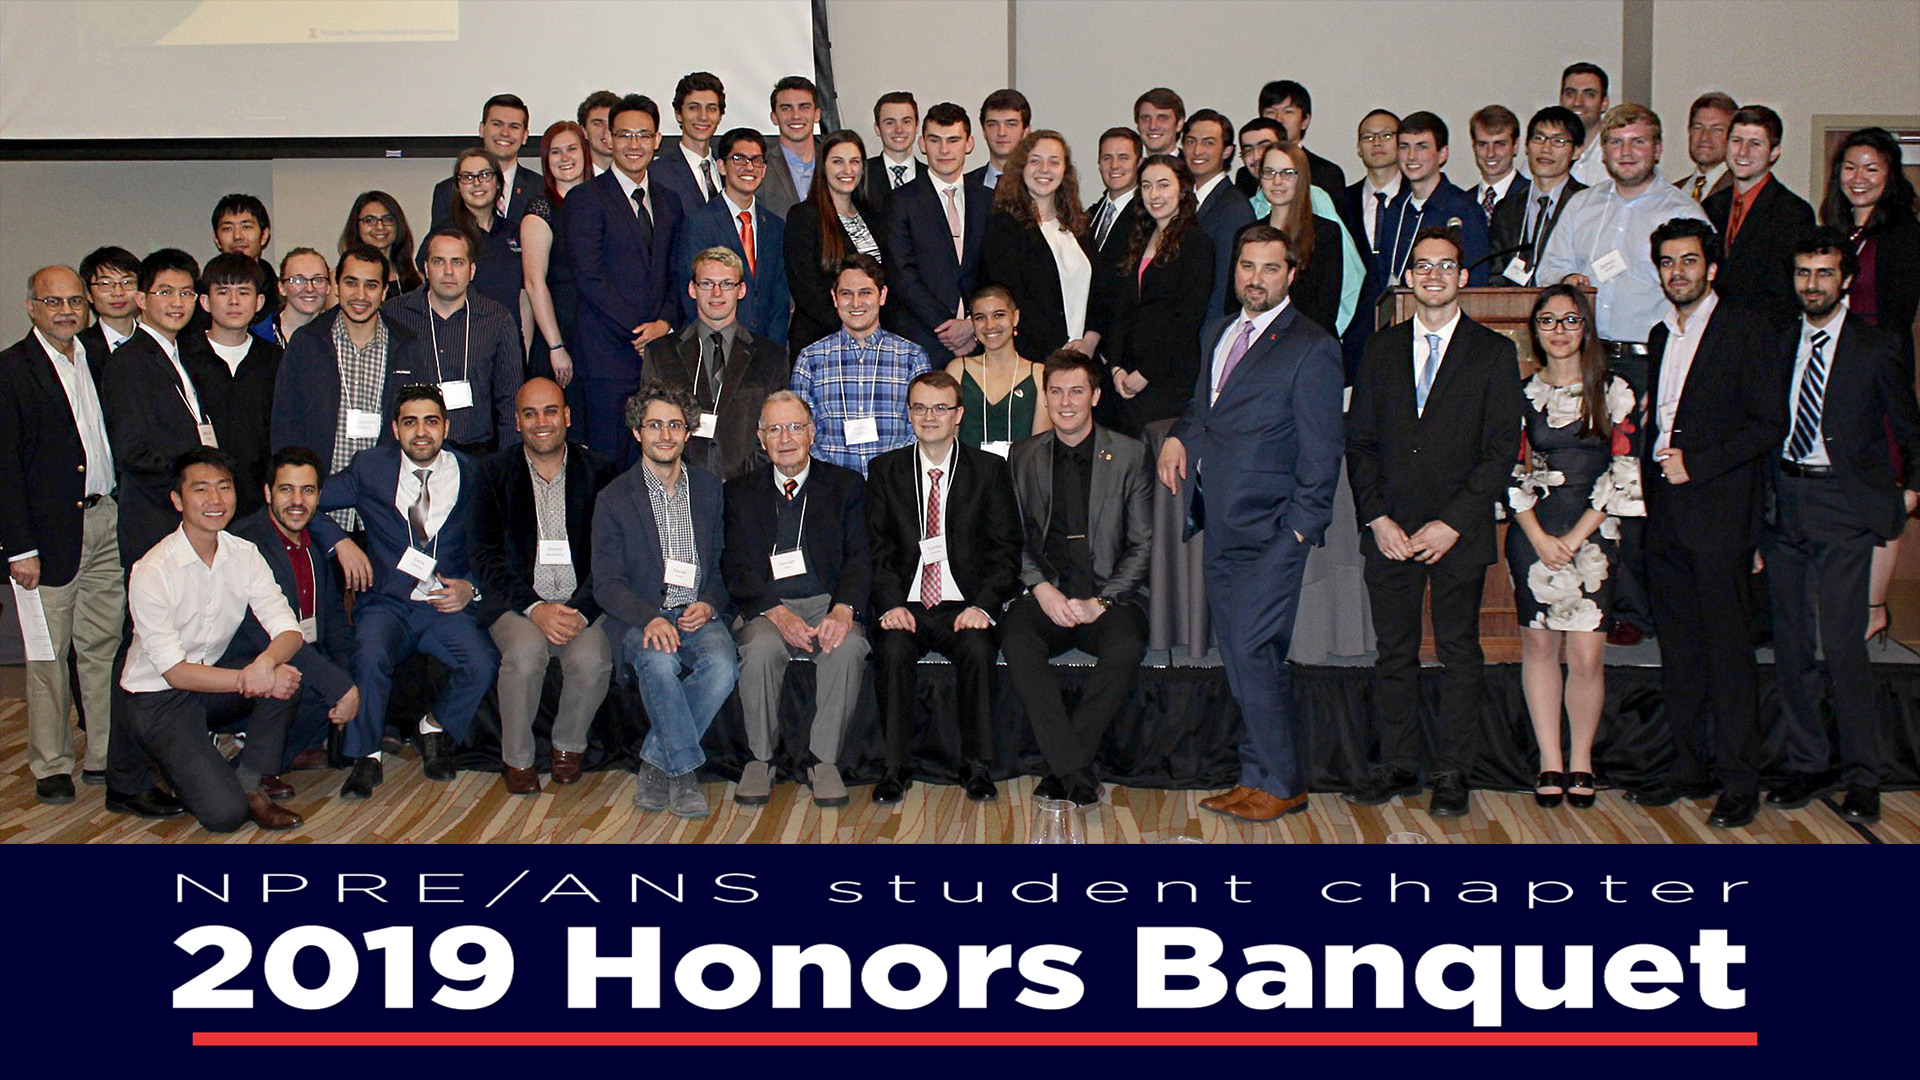 Student excellence recognized in 2019 Honors Banquet